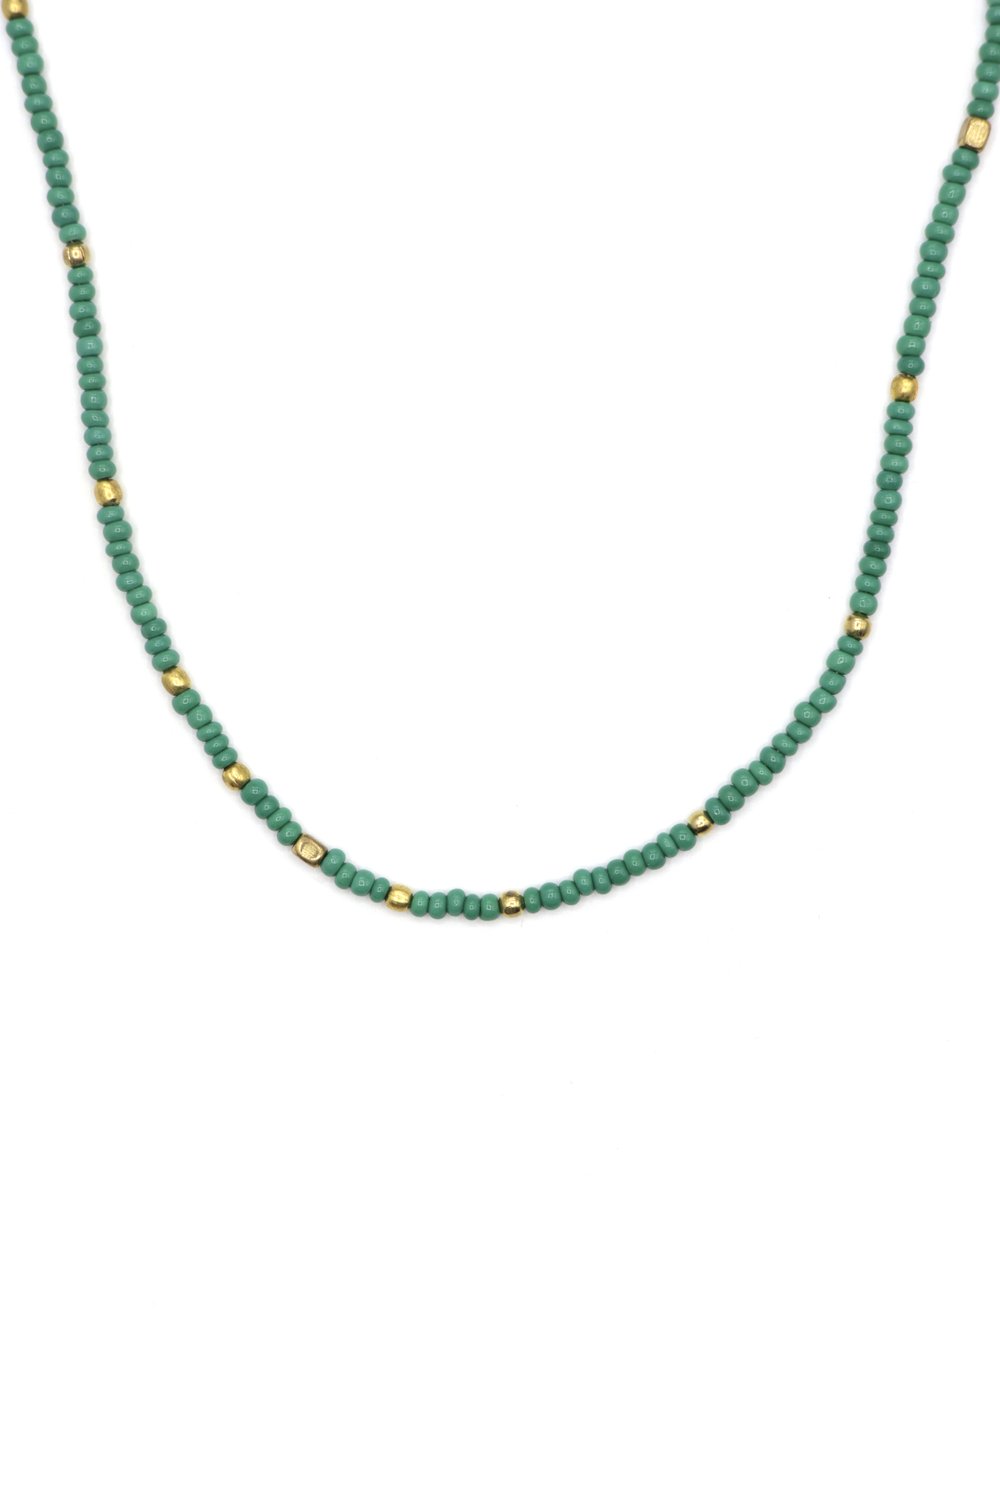 17-20" Vintage Green and Brass Beaded Necklace